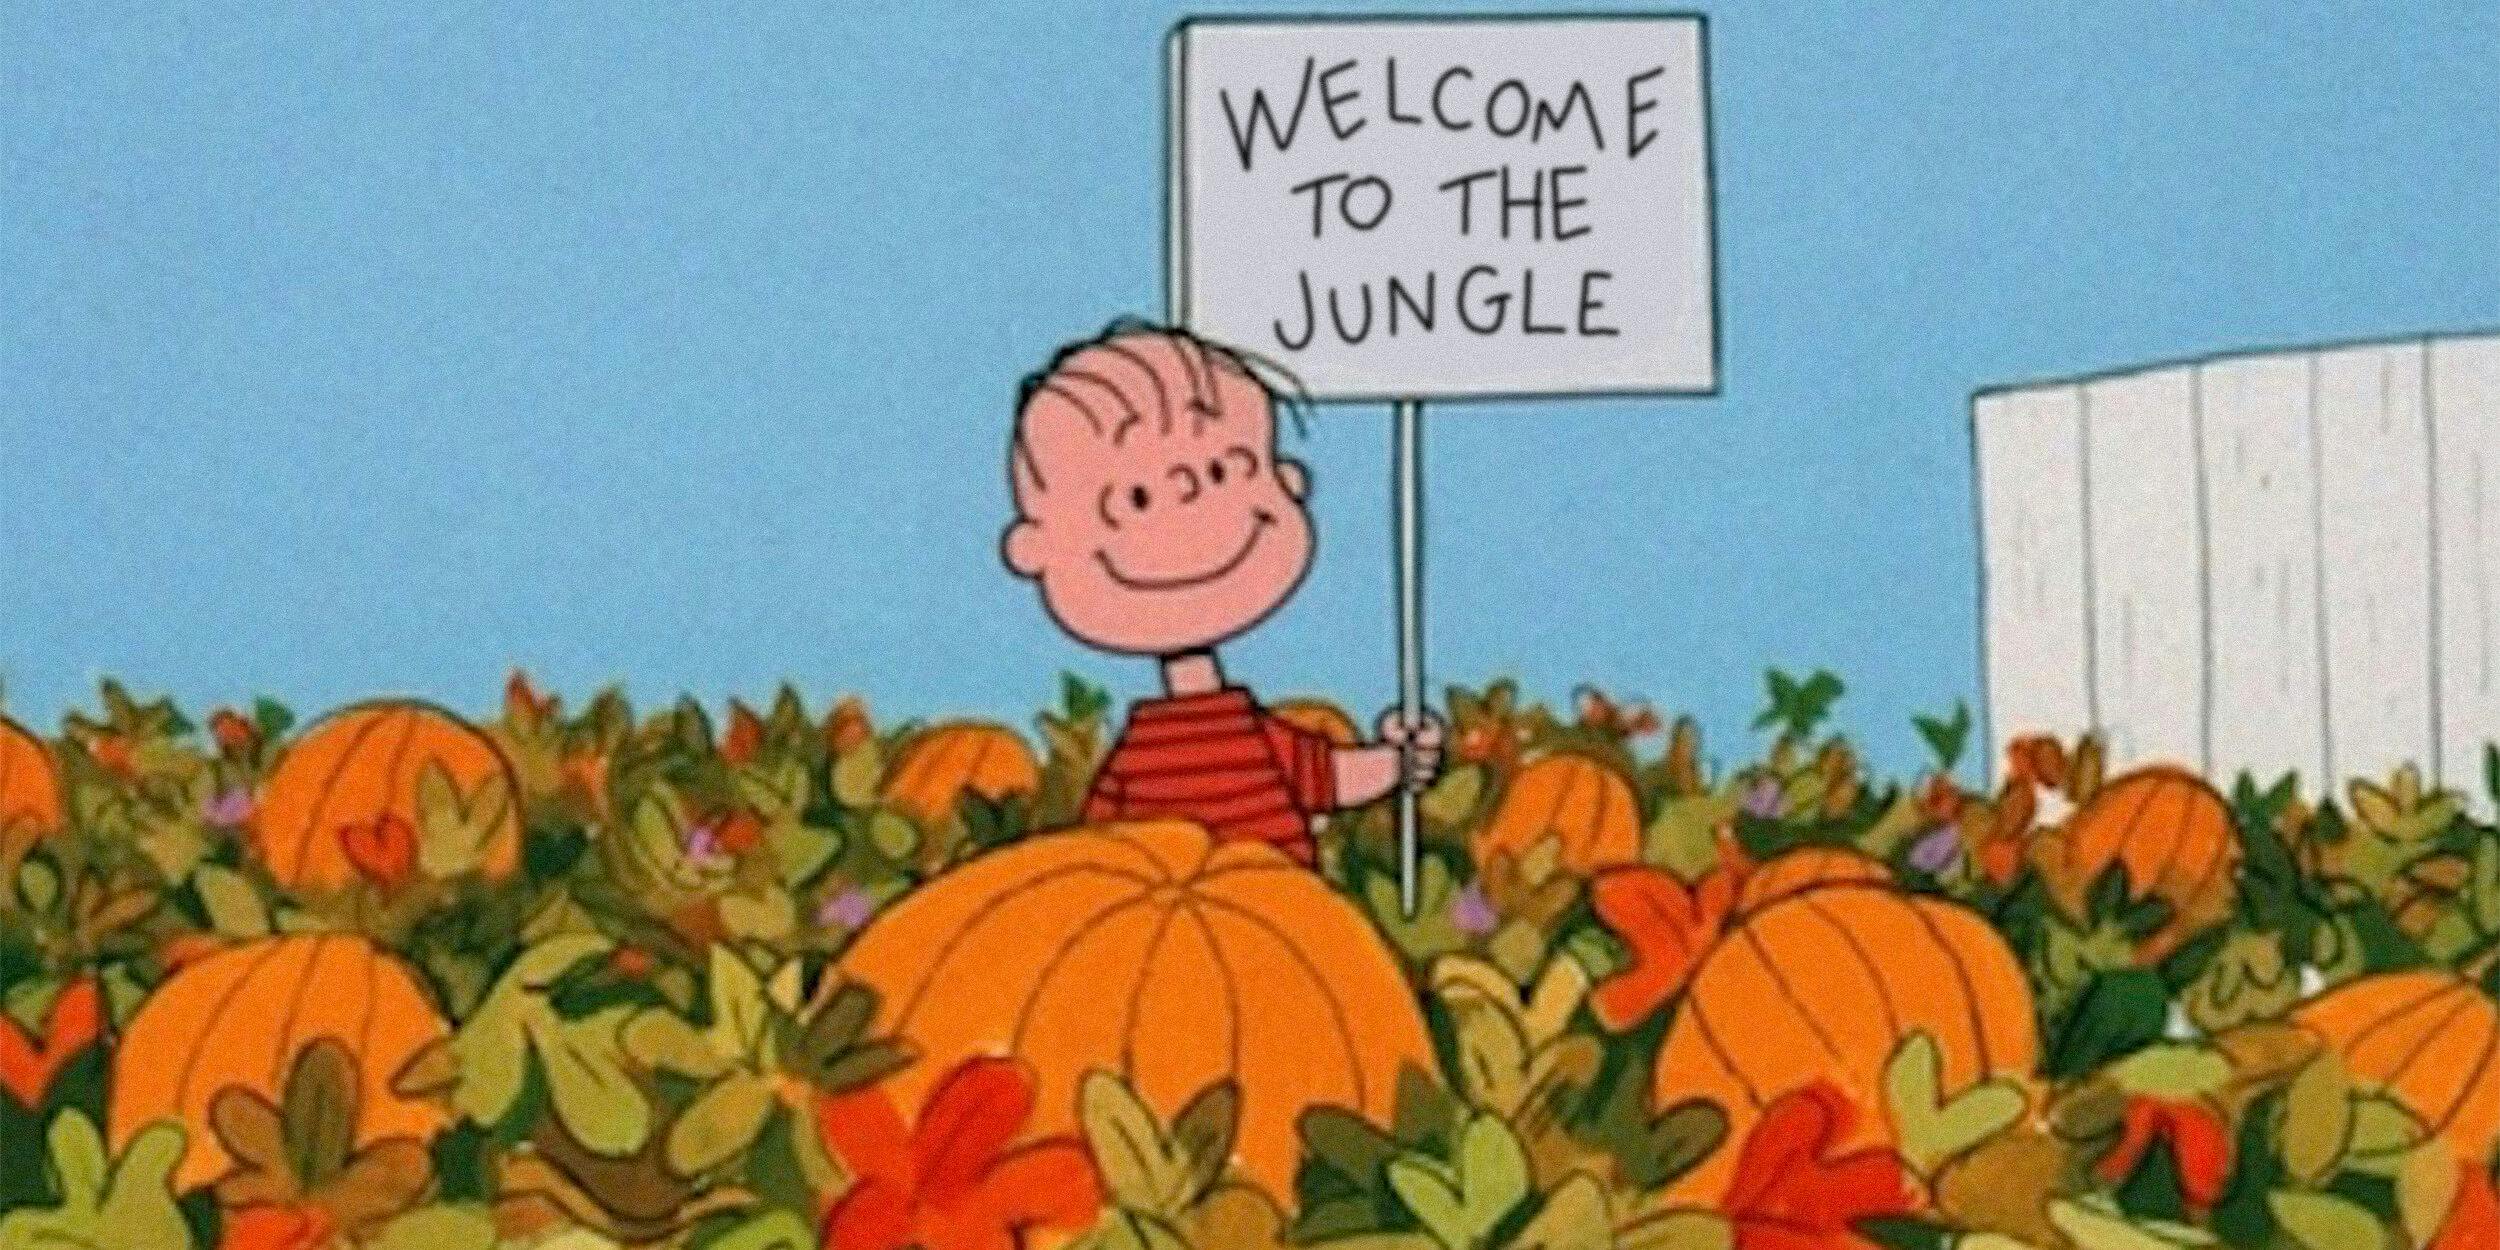 linus in the pumpkin patch holding sign that says "welcome to the jungle"